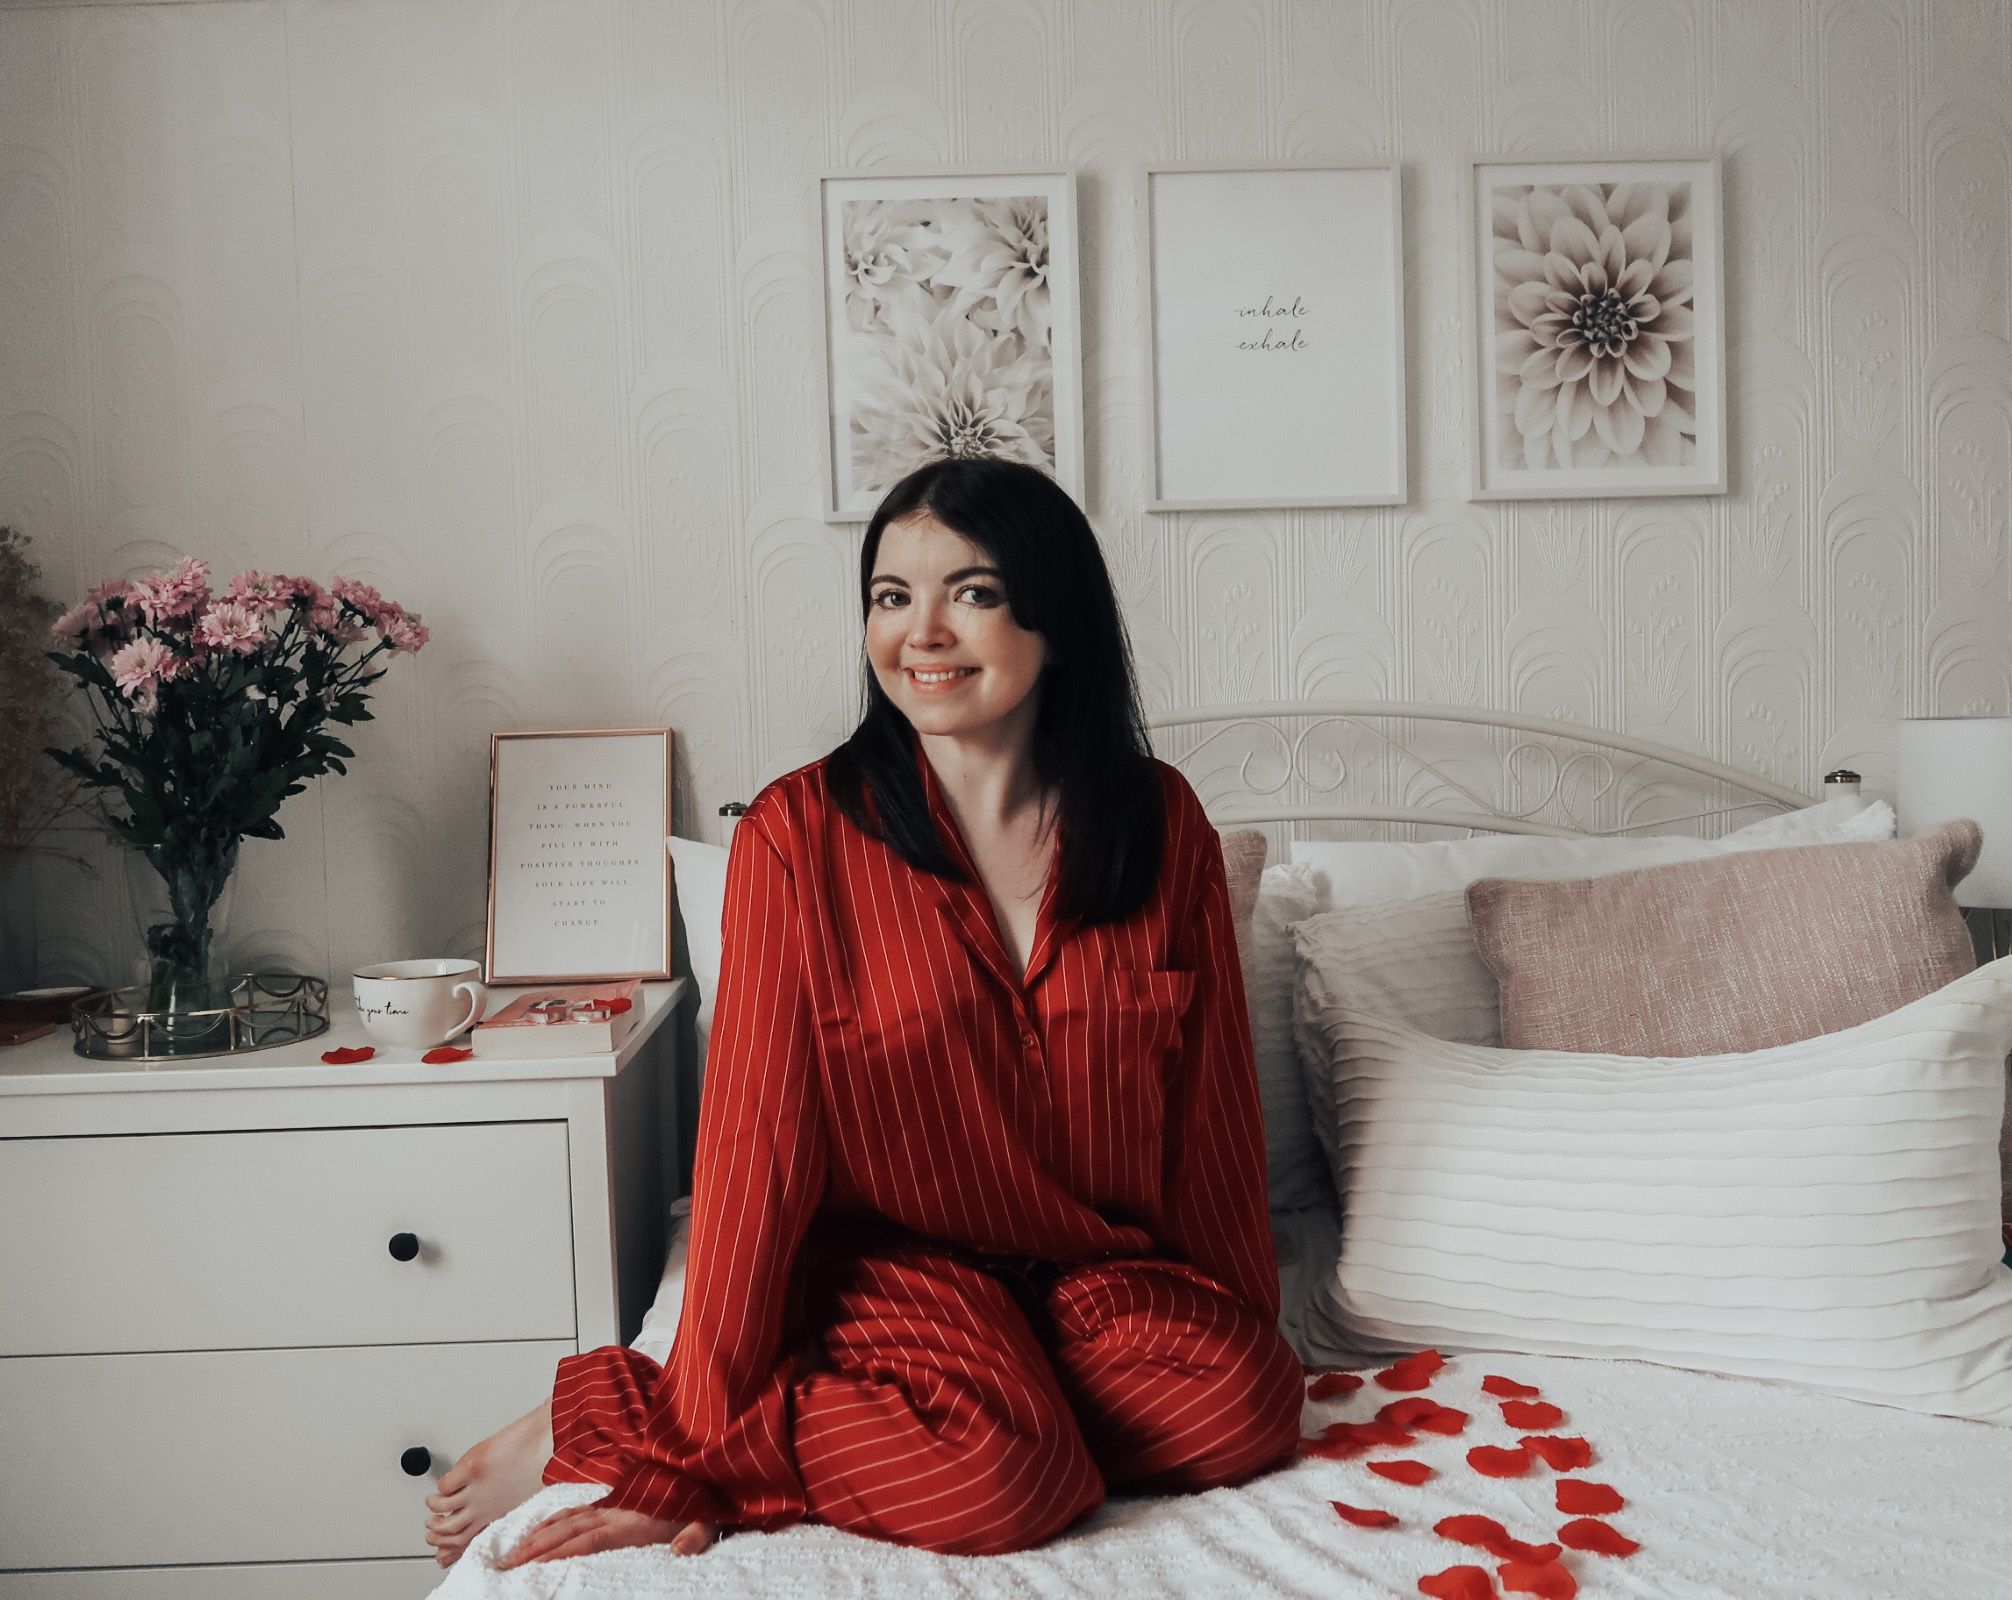 A woman sat on a bed in red pyjamas.